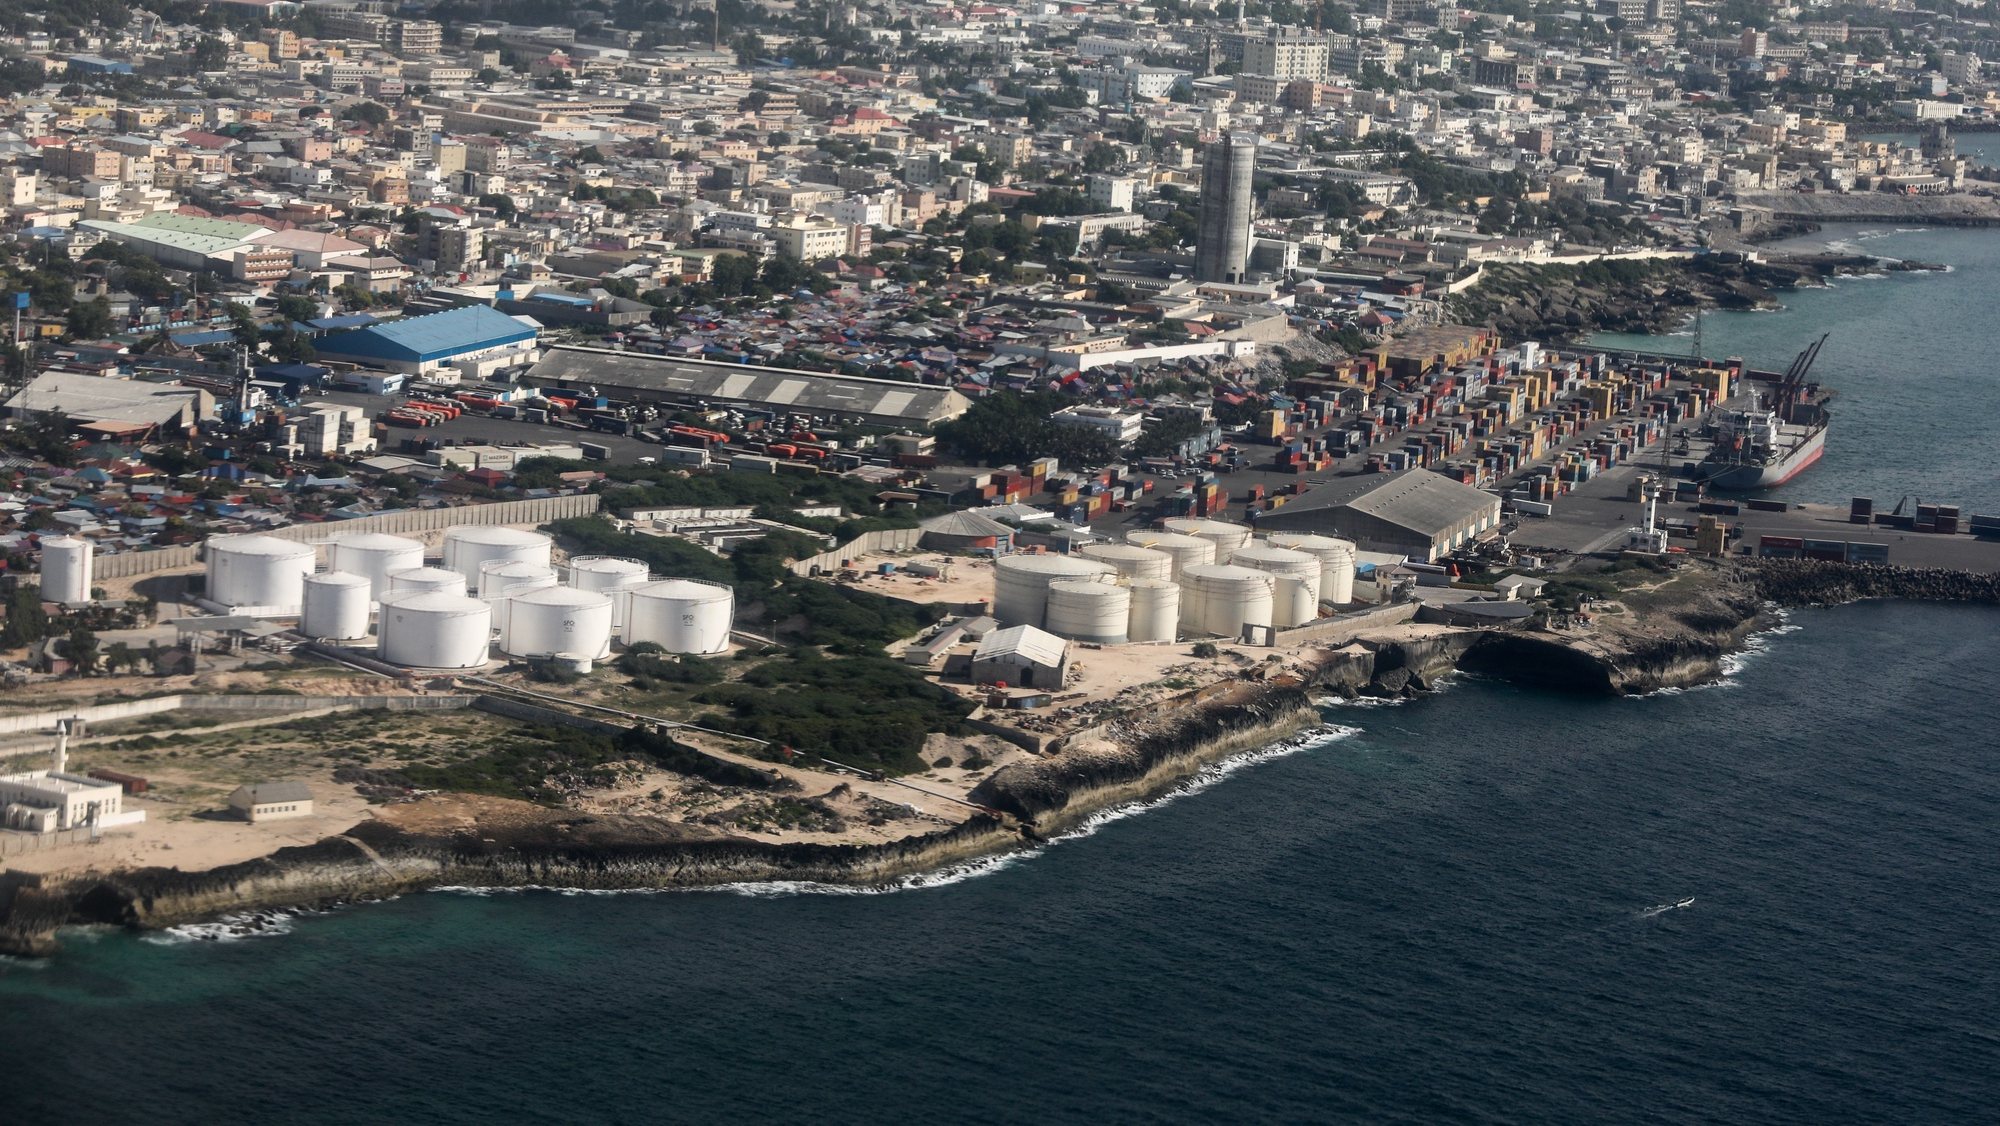 epa08075483 An aerial view picture shows the Mogadishu International Port in Mogadishu, Somalia, 14 December 2019 (issued 16 October 2019). The Somali capital is split into two totally separate worlds by a kilometer-long bomb-proof barrier: the conflict-riddled Mogadishu and the secure &#039;Green Zone&#039;, an urban bubble which is home to UN personnel, diplomats, bodyguards, soldiers and spies.  EPA/Daniel Irungu